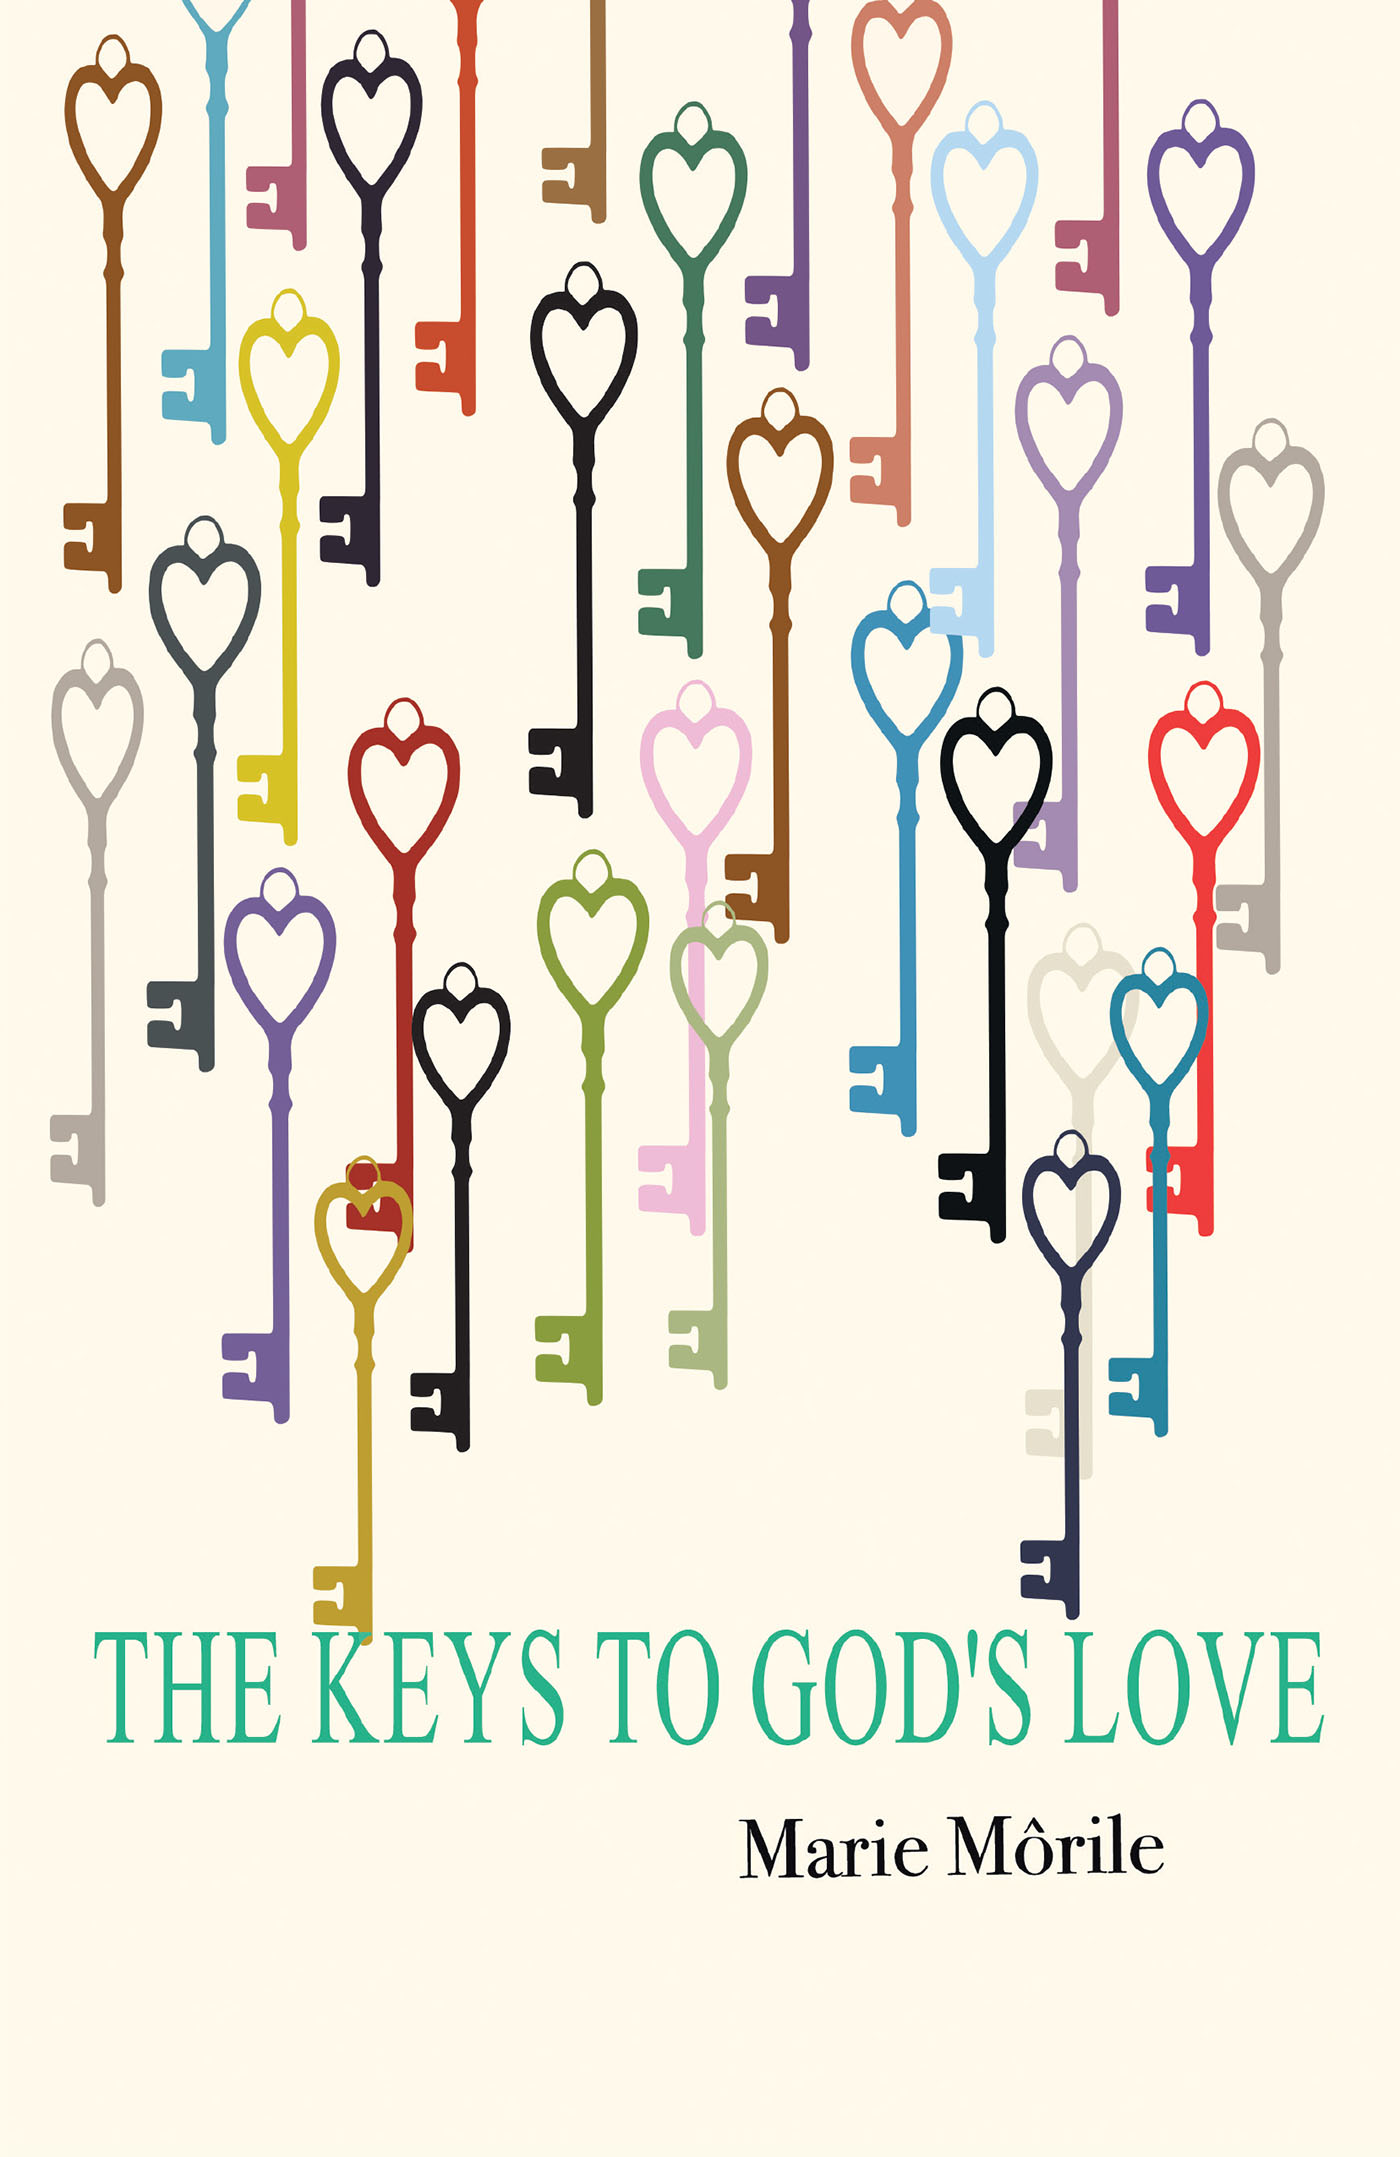 Marie Morile’s Newly Released "The Keys to God’s Love" is an Engaging Autobiographical Work That Explores the Author’s Spiritual Experiences